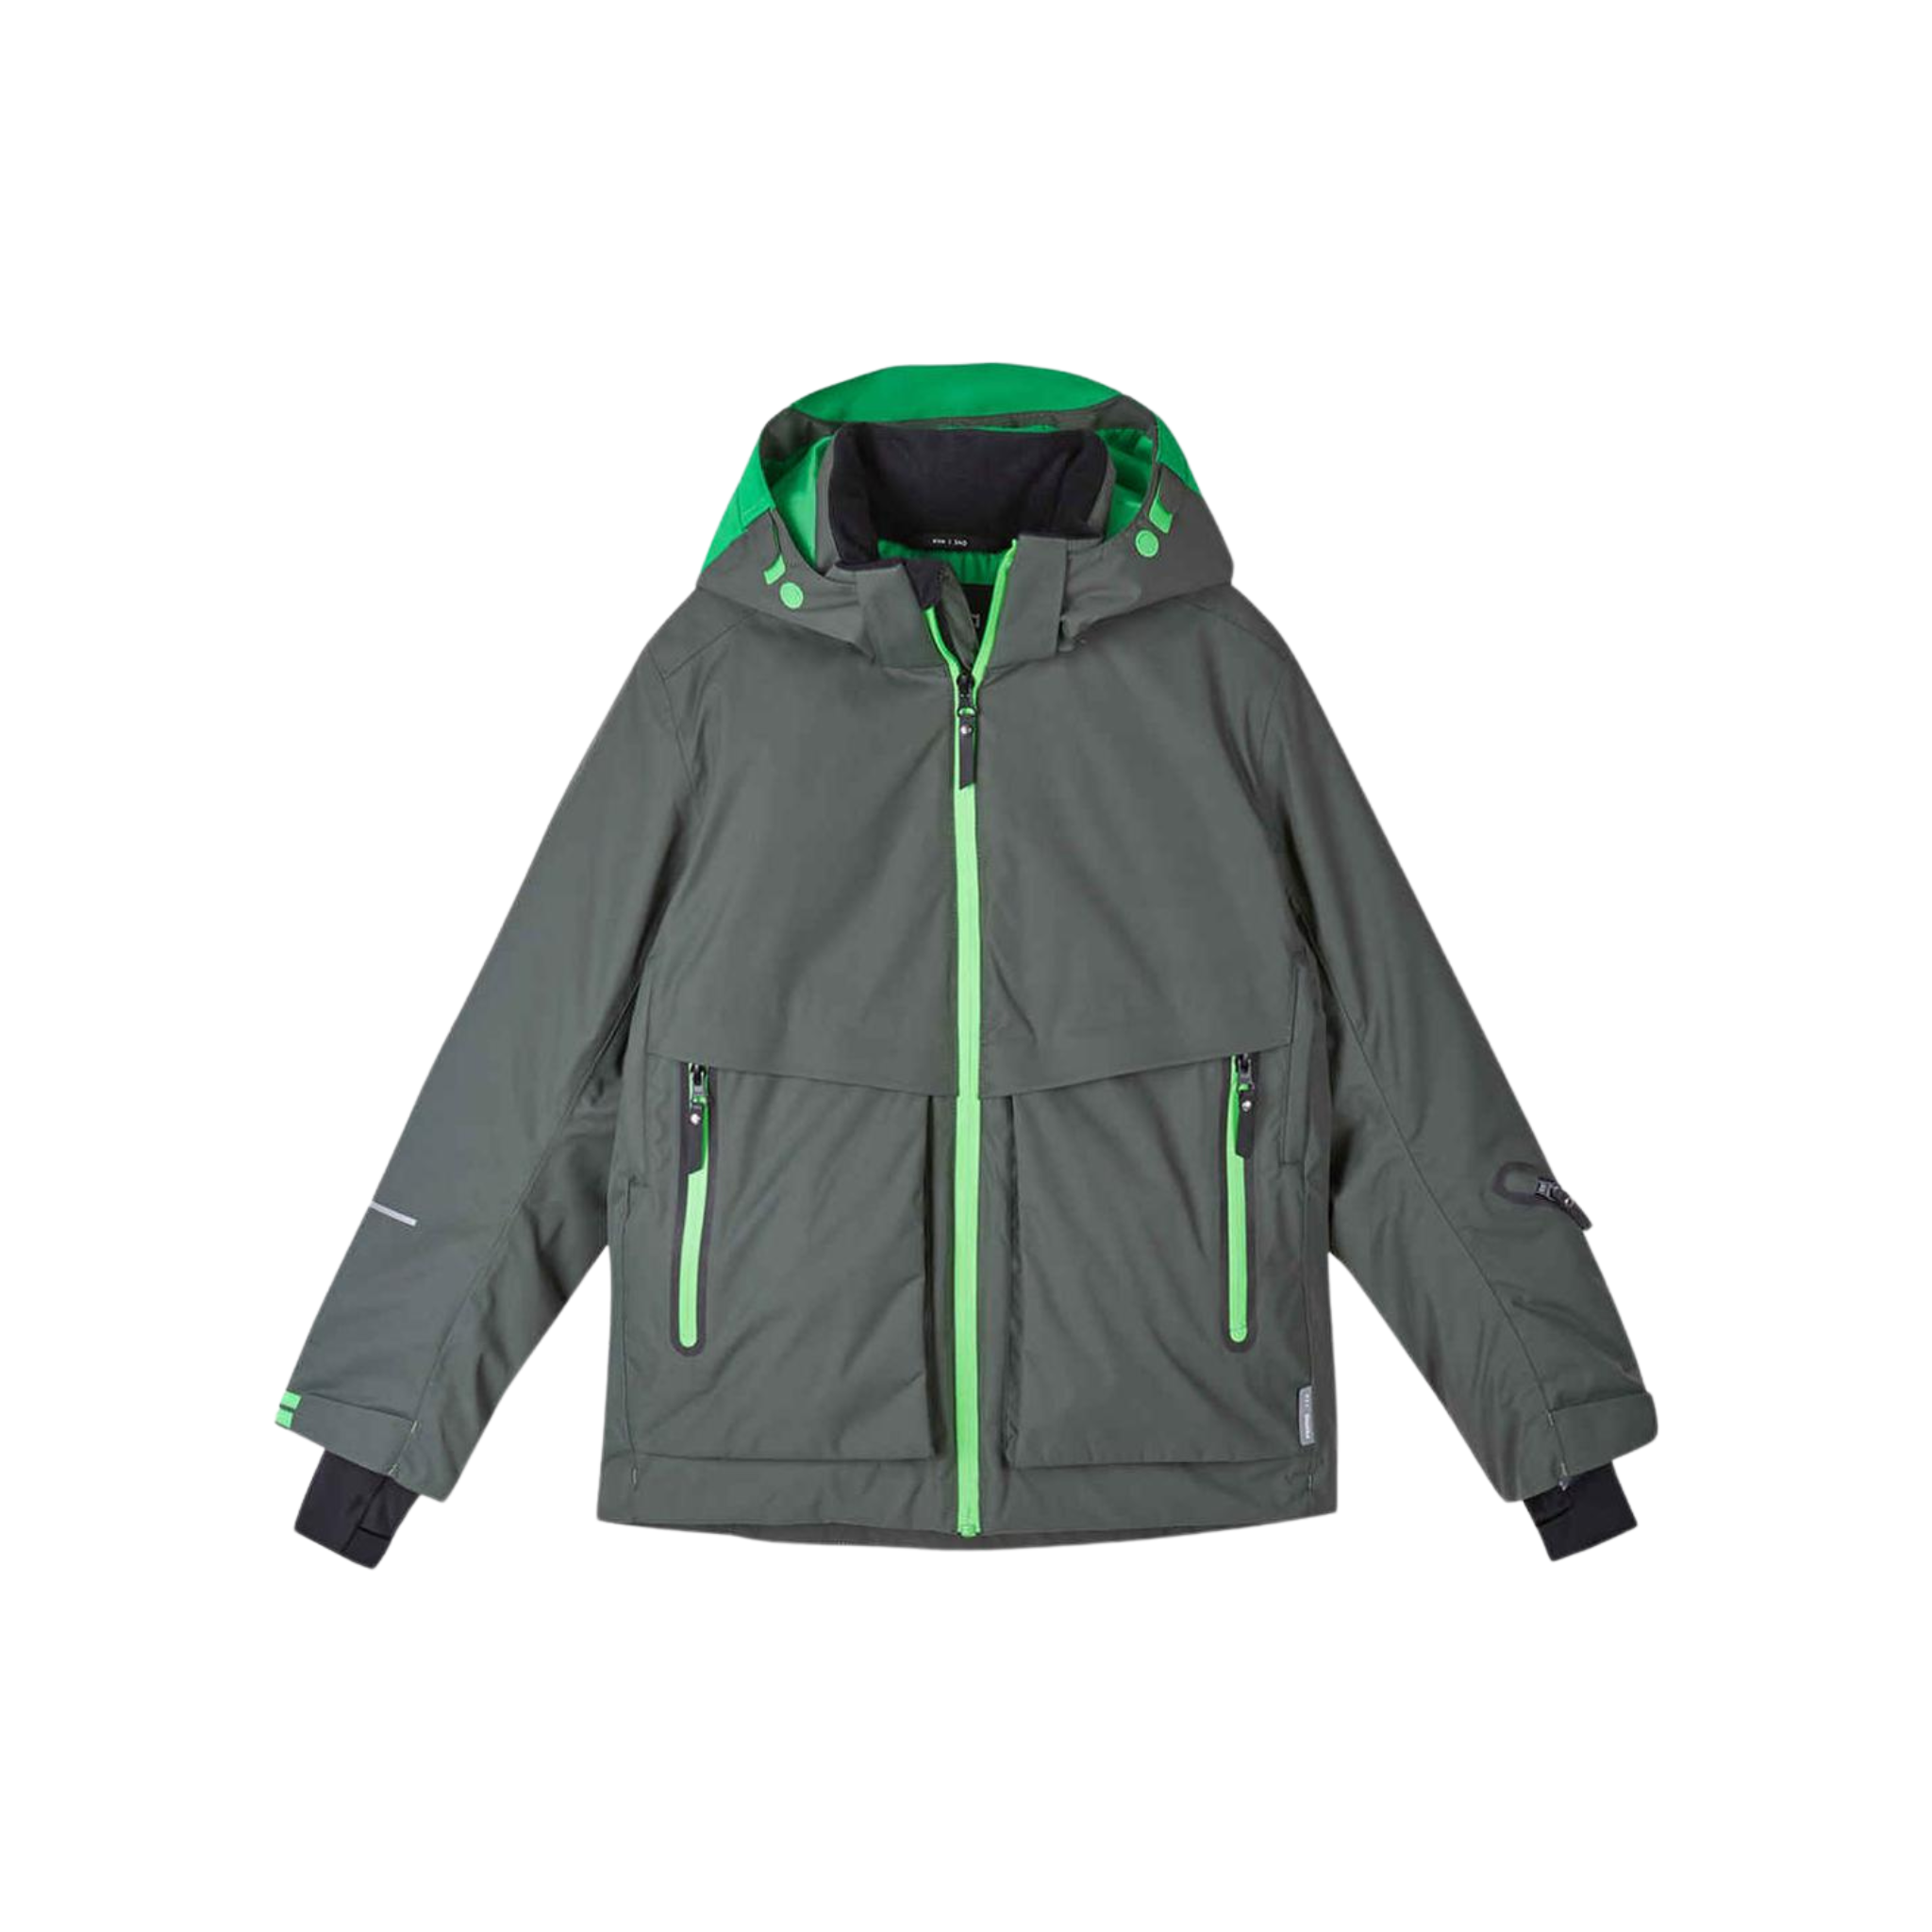 Reimatec Winter Jacket, Tirro in Thyme Green – Biddle and Bop